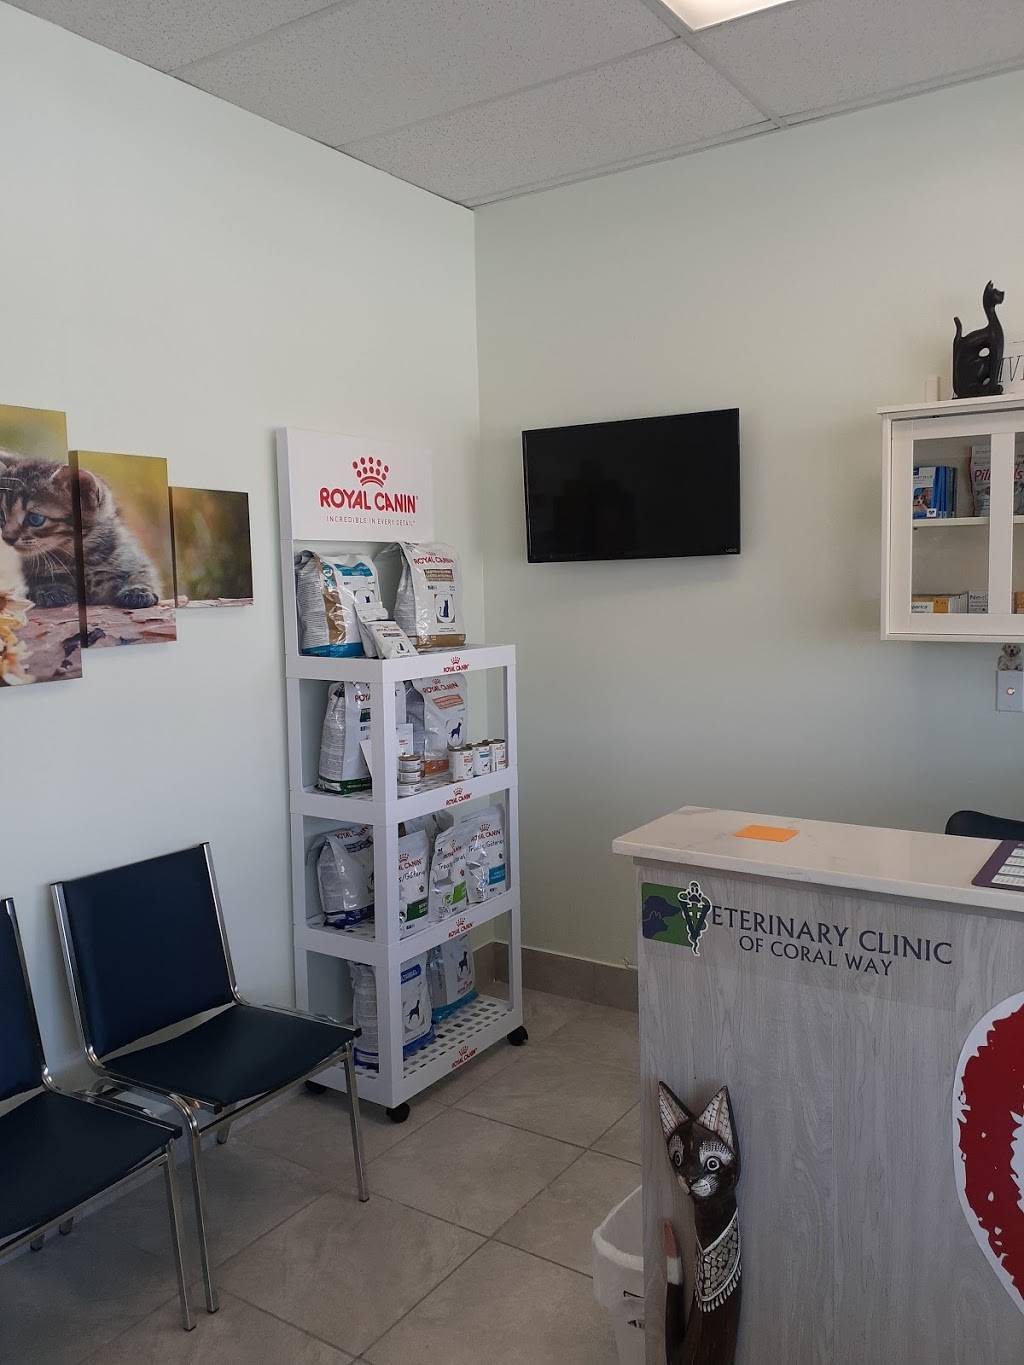 Veterinary Clinic Of Coral Way | Photo 5 of 5 | Address: 9624 SW 24th St, Miami, FL 33165, USA | Phone: (786) 631-4983